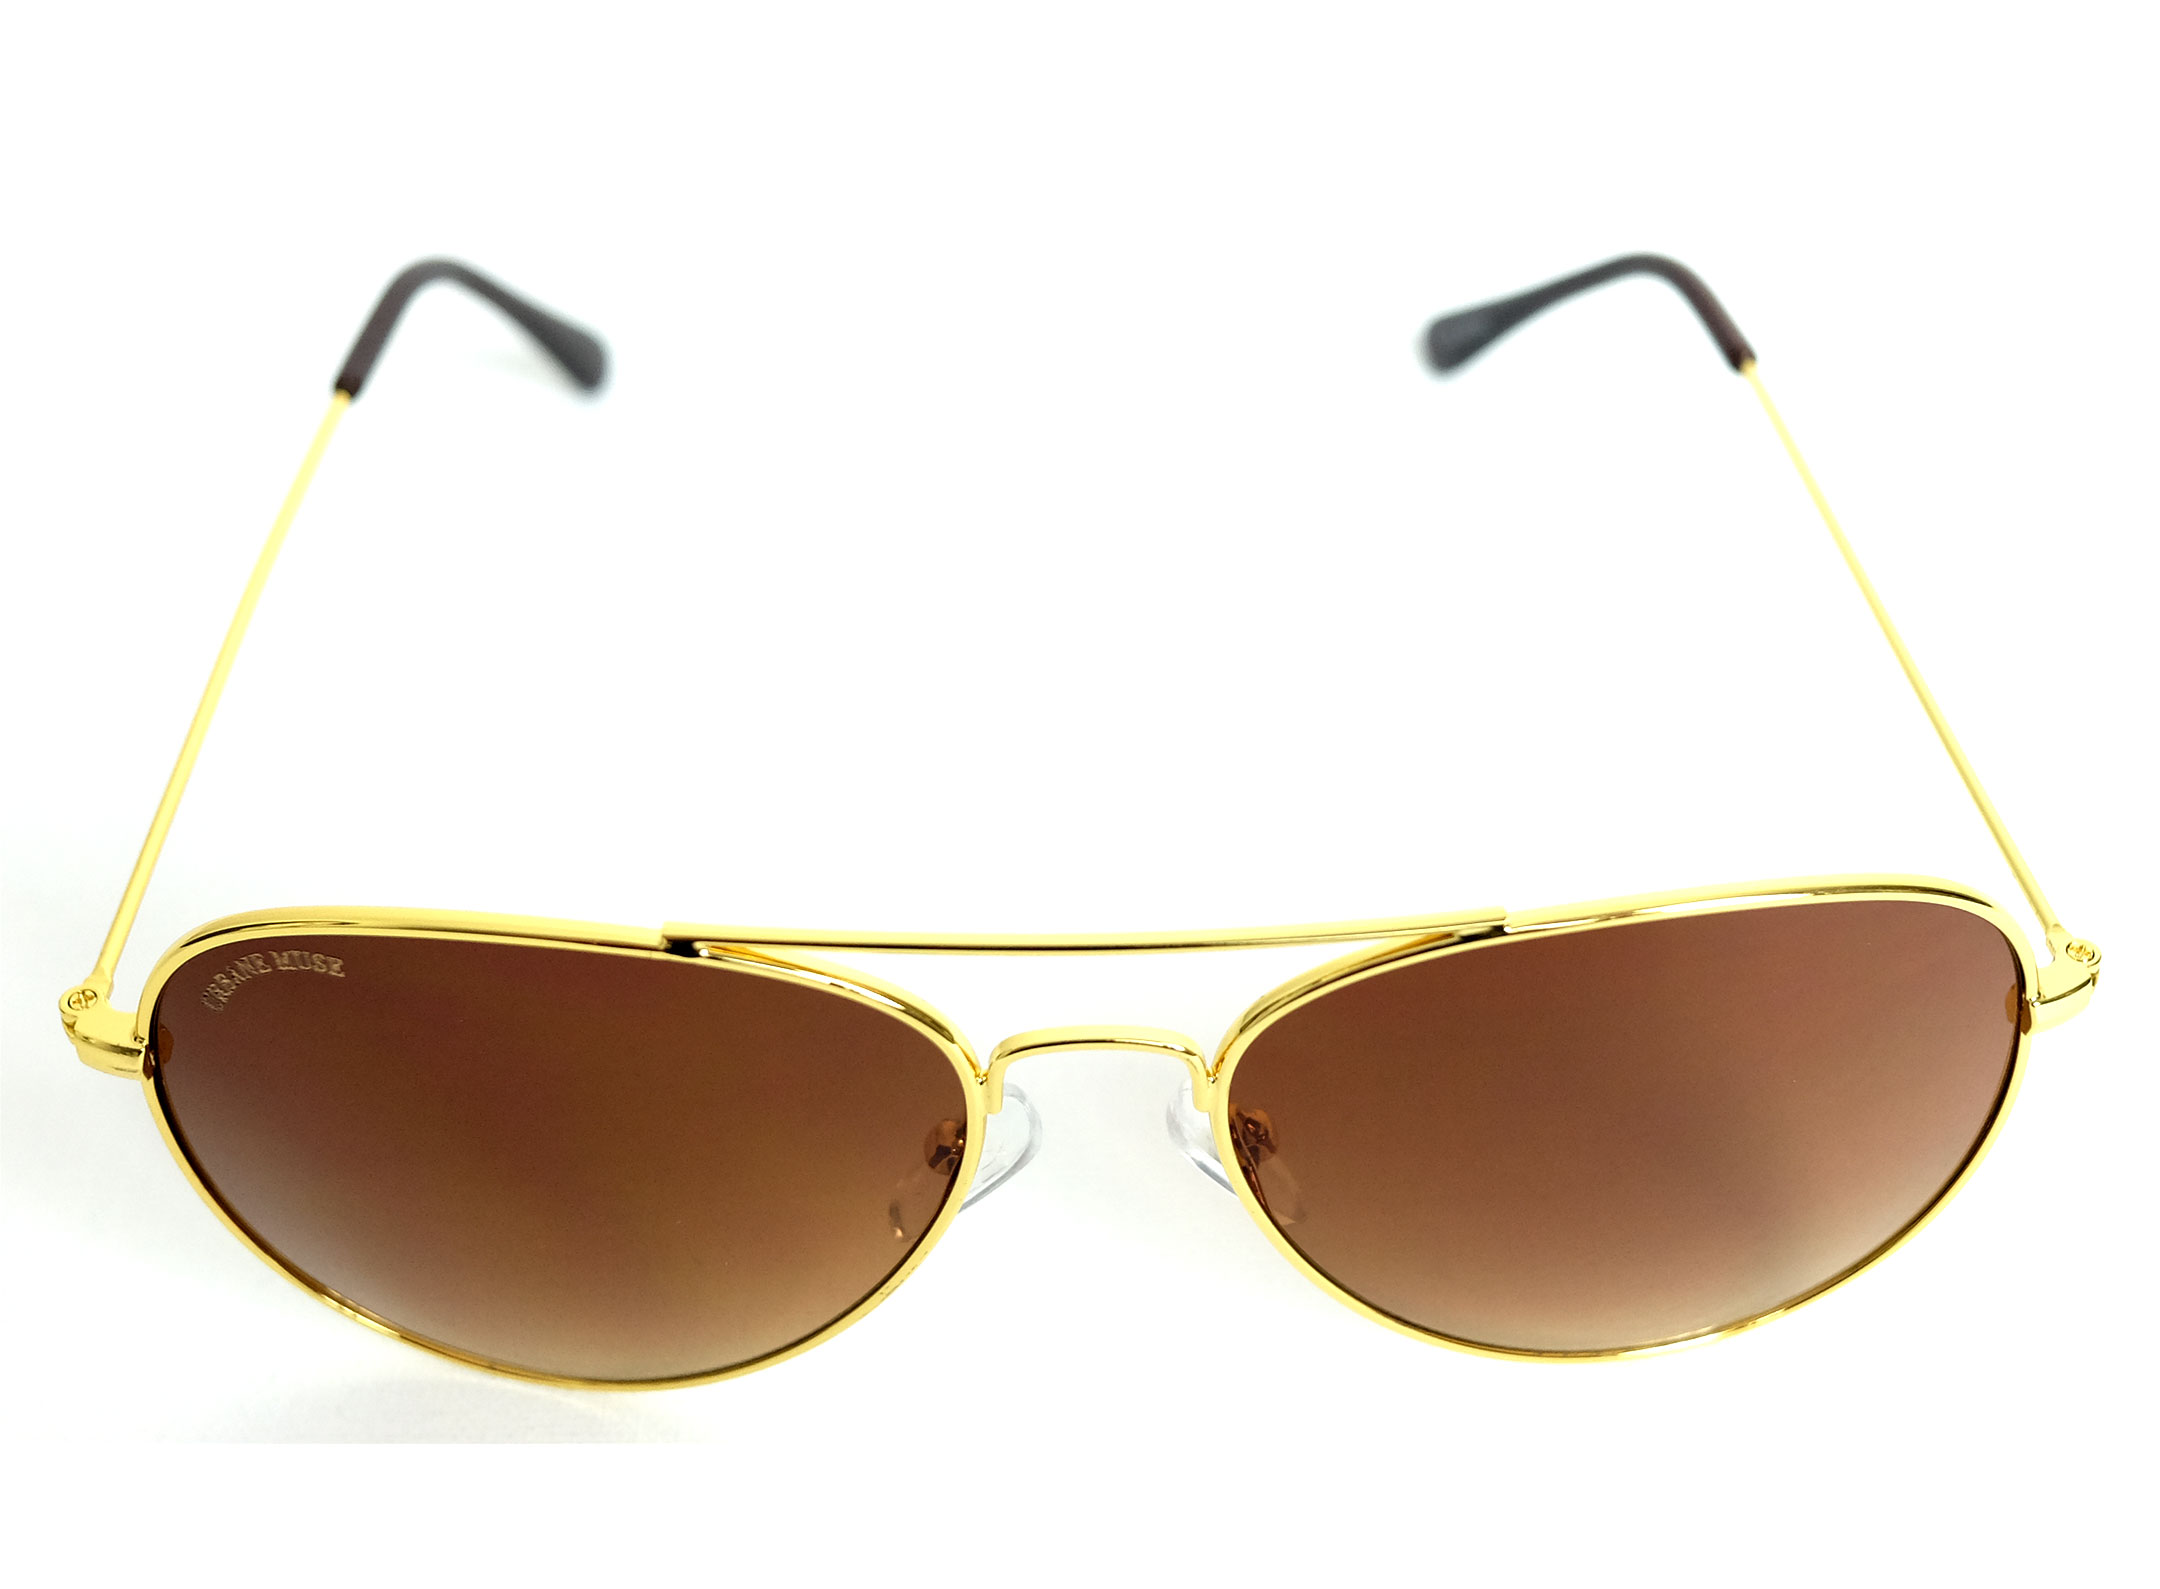 Brown Metal Frame - SMITH® MUSE Gold Gradient Aviator with URBANE Sunglasses CHRIS